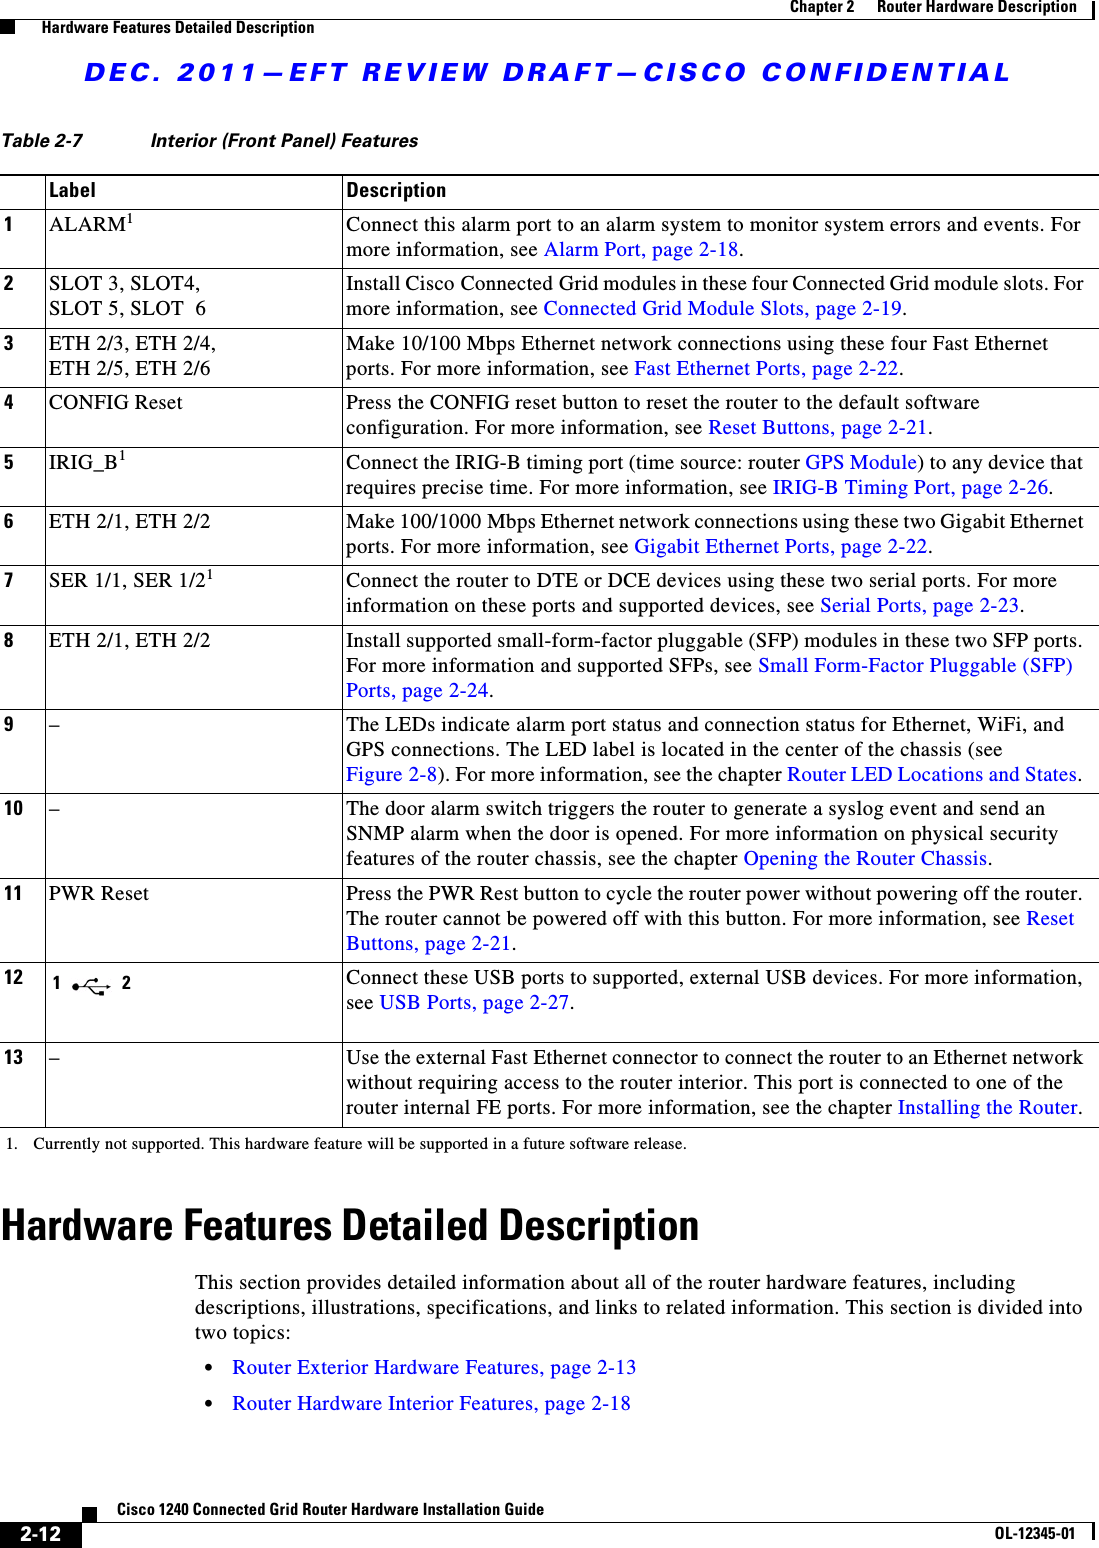 DEC. 2011—EFT REVIEW DRAFT—CISCO CONFIDENTIAL2-12Cisco 1240 Connected Grid Router Hardware Installation GuideOL-12345-01Chapter 2      Router Hardware Description  Hardware Features Detailed DescriptionHardware Features Detailed DescriptionThis section provides detailed information about all of the router hardware features, including descriptions, illustrations, specifications, and links to related information. This section is divided into two topics:  • Router Exterior Hardware Features, page 2-13  • Router Hardware Interior Features, page 2-18Table 2-7 Interior (Front Panel) FeaturesLabel Description1ALARM11. Currently not supported. This hardware feature will be supported in a future software release.Connect this alarm port to an alarm system to monitor system errors and events. For more information, see Alarm Port, page 2-18. 2SLOT 3, SLOT4,  SLOT 5, SLOT  6Install Cisco Connected Grid modules in these four Connected Grid module slots. For more information, see Connected Grid Module Slots, page 2-19.3ETH 2/3, ETH 2/4,  ETH 2/5, ETH 2/6Make 10/100 Mbps Ethernet network connections using these four Fast Ethernet ports. For more information, see Fast Ethernet Ports, page 2-22.4CONFIG Reset Press the CONFIG reset button to reset the router to the default software configuration. For more information, see Reset Buttons, page 2-21.5IRIG_B1Connect the IRIG-B timing port (time source: router GPS Module) to any device that requires precise time. For more information, see IRIG-B Timing Port, page 2-26.6ETH 2/1, ETH 2/2 Make 100/1000 Mbps Ethernet network connections using these two Gigabit Ethernet ports. For more information, see Gigabit Ethernet Ports, page 2-22.7SER 1/1, SER 1/21Connect the router to DTE or DCE devices using these two serial ports. For more information on these ports and supported devices, see Serial Ports, page 2-23.8ETH 2/1, ETH 2/2 Install supported small-form-factor pluggable (SFP) modules in these two SFP ports. For more information and supported SFPs, see Small Form-Factor Pluggable (SFP) Ports, page 2-24. 9–The LEDs indicate alarm port status and connection status for Ethernet, WiFi, and GPS connections. The LED label is located in the center of the chassis (see Figure 2-8). For more information, see the chapter Router LED Locations and States. 10 –The door alarm switch triggers the router to generate a syslog event and send an SNMP alarm when the door is opened. For more information on physical security features of the router chassis, see the chapter Opening the Router Chassis.11 PWR Reset Press the PWR Rest button to cycle the router power without powering off the router. The router cannot be powered off with this button. For more information, see Reset Buttons, page 2-21.12 Connect these USB ports to supported, external USB devices. For more information, see USB Ports, page 2-27.13 –Use the external Fast Ethernet connector to connect the router to an Ethernet network without requiring access to the router interior. This port is connected to one of the router internal FE ports. For more information, see the chapter Installing the Router.1 2